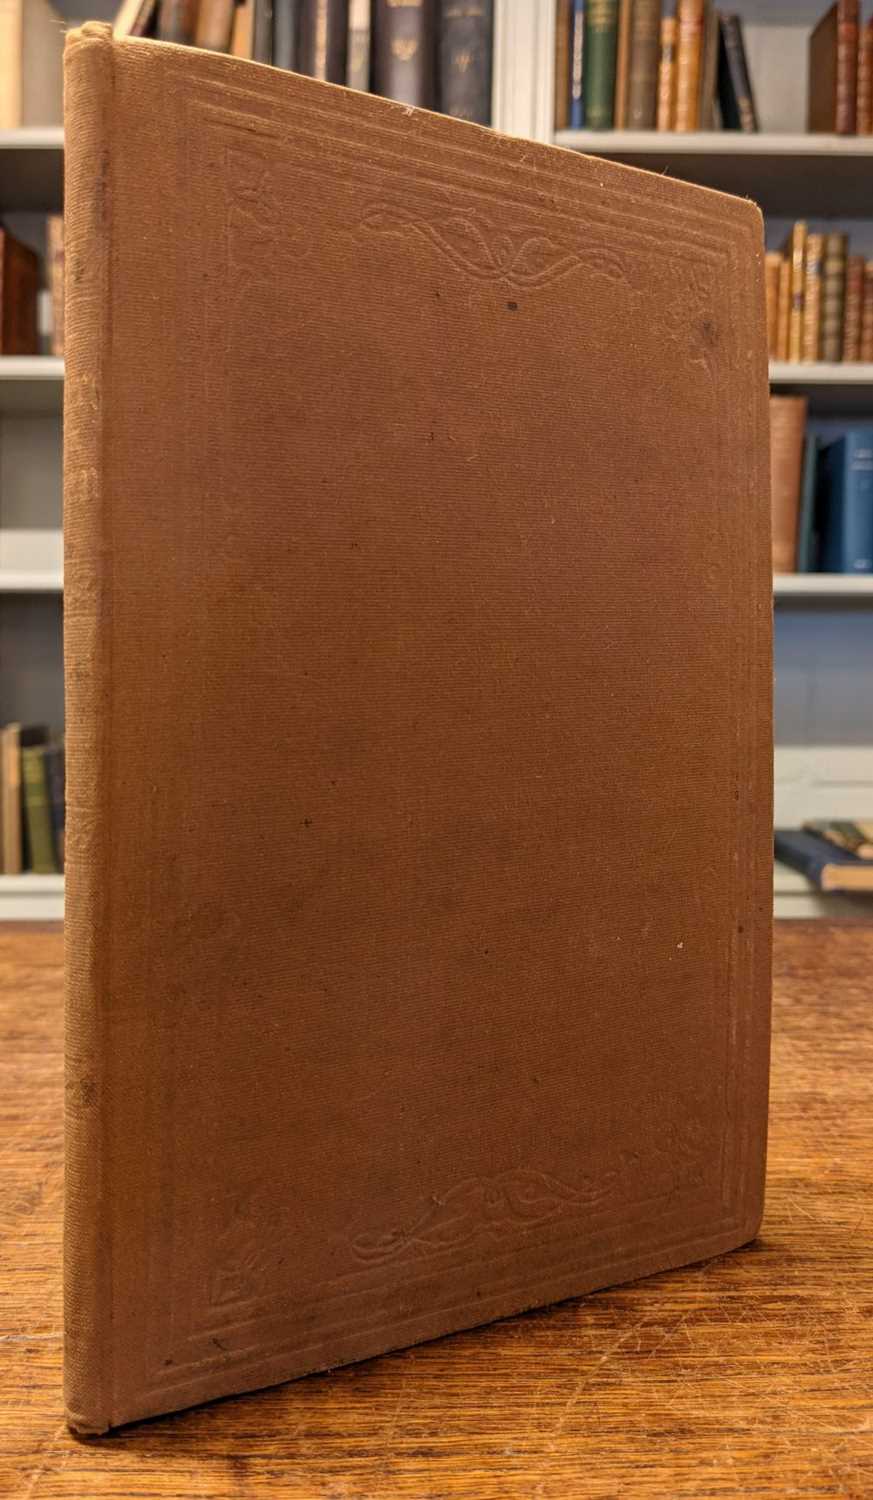 Lot 70 - Merewether (John). Diary of a Dean. Being an account of the examination of Silbury Hill, 1851